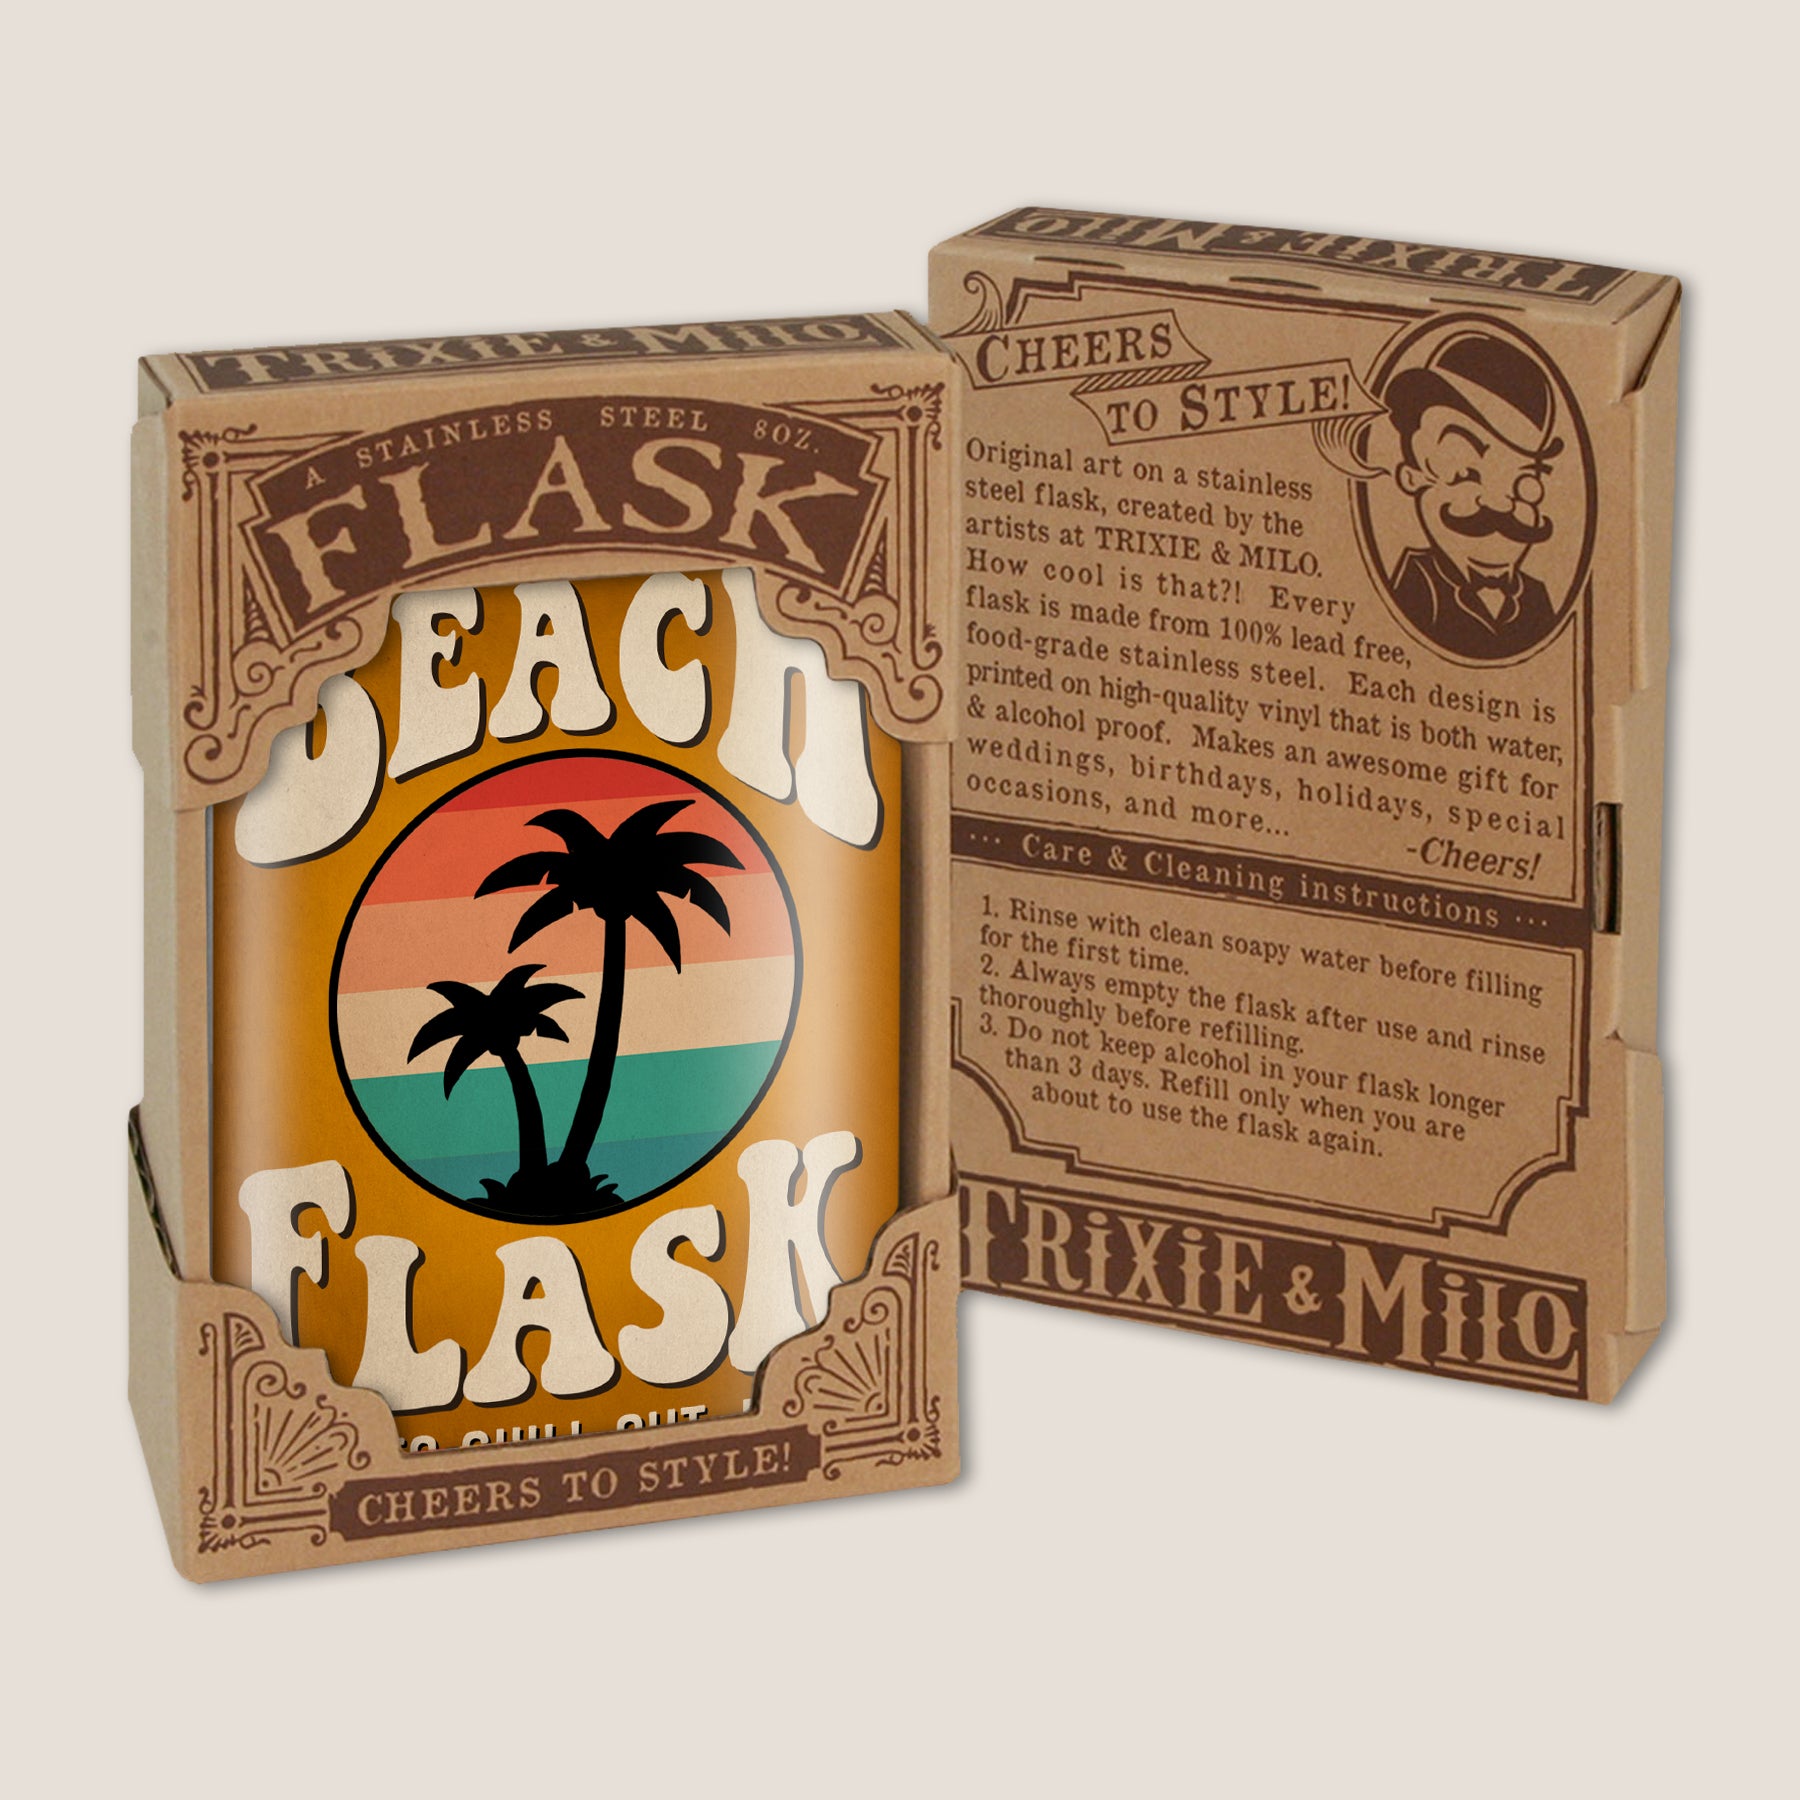 8 oz. Hip Flask: Beach Flask "Time to Chill Out, Dude!" Kick off every holiday or summer beach party with confidence. Cool stylish stainless steel drinking flask. Designed for durability and aesthetic appeal in gift box